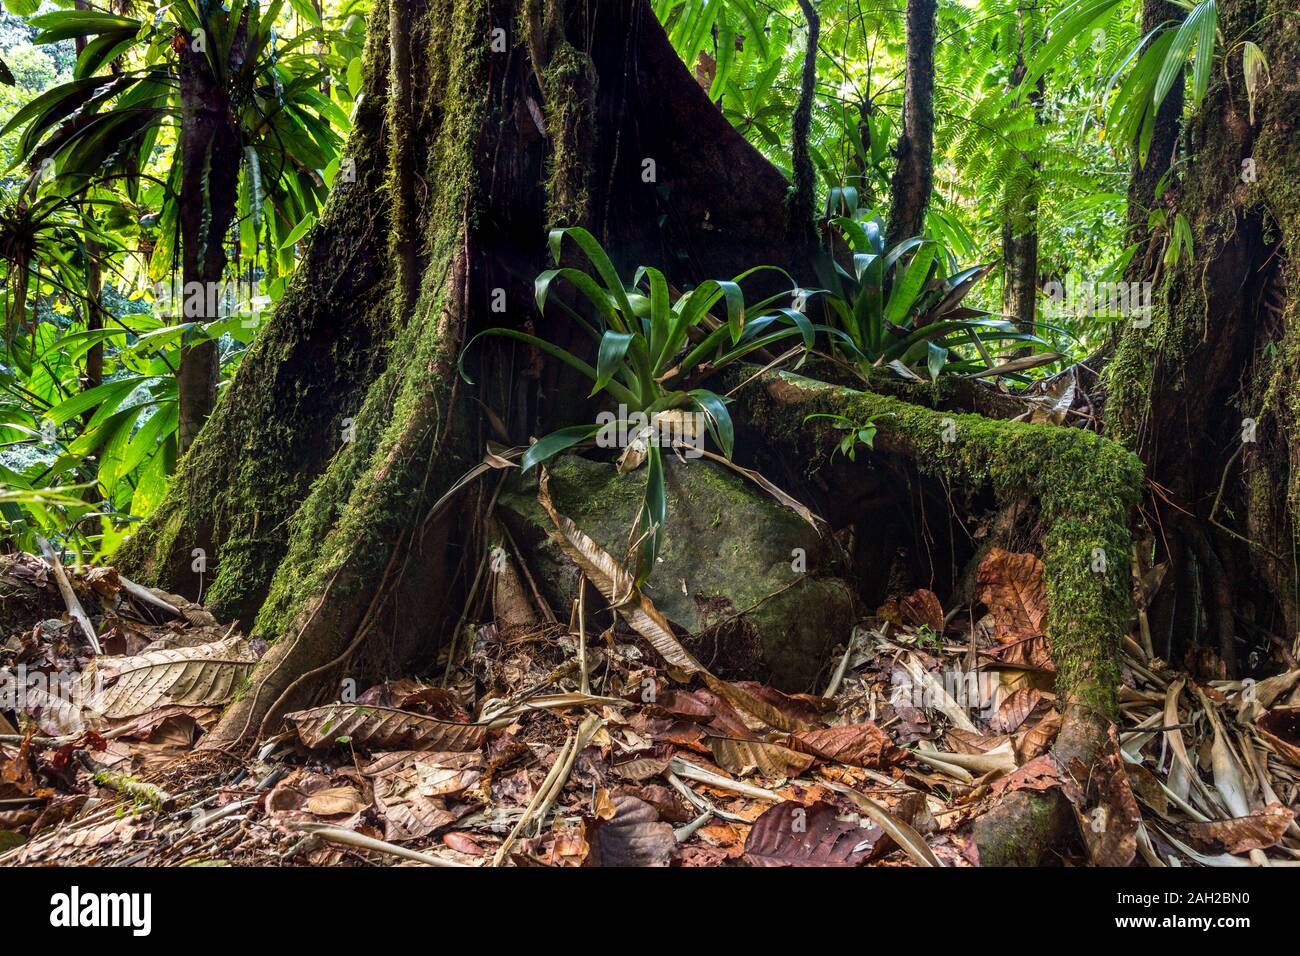 Large bromeliads  grow on moss-covered roots of a tropical buttress tree in the Guadeloupe National Park on the island of Basse-Terre, Guadeloupe.  A Stock Photo